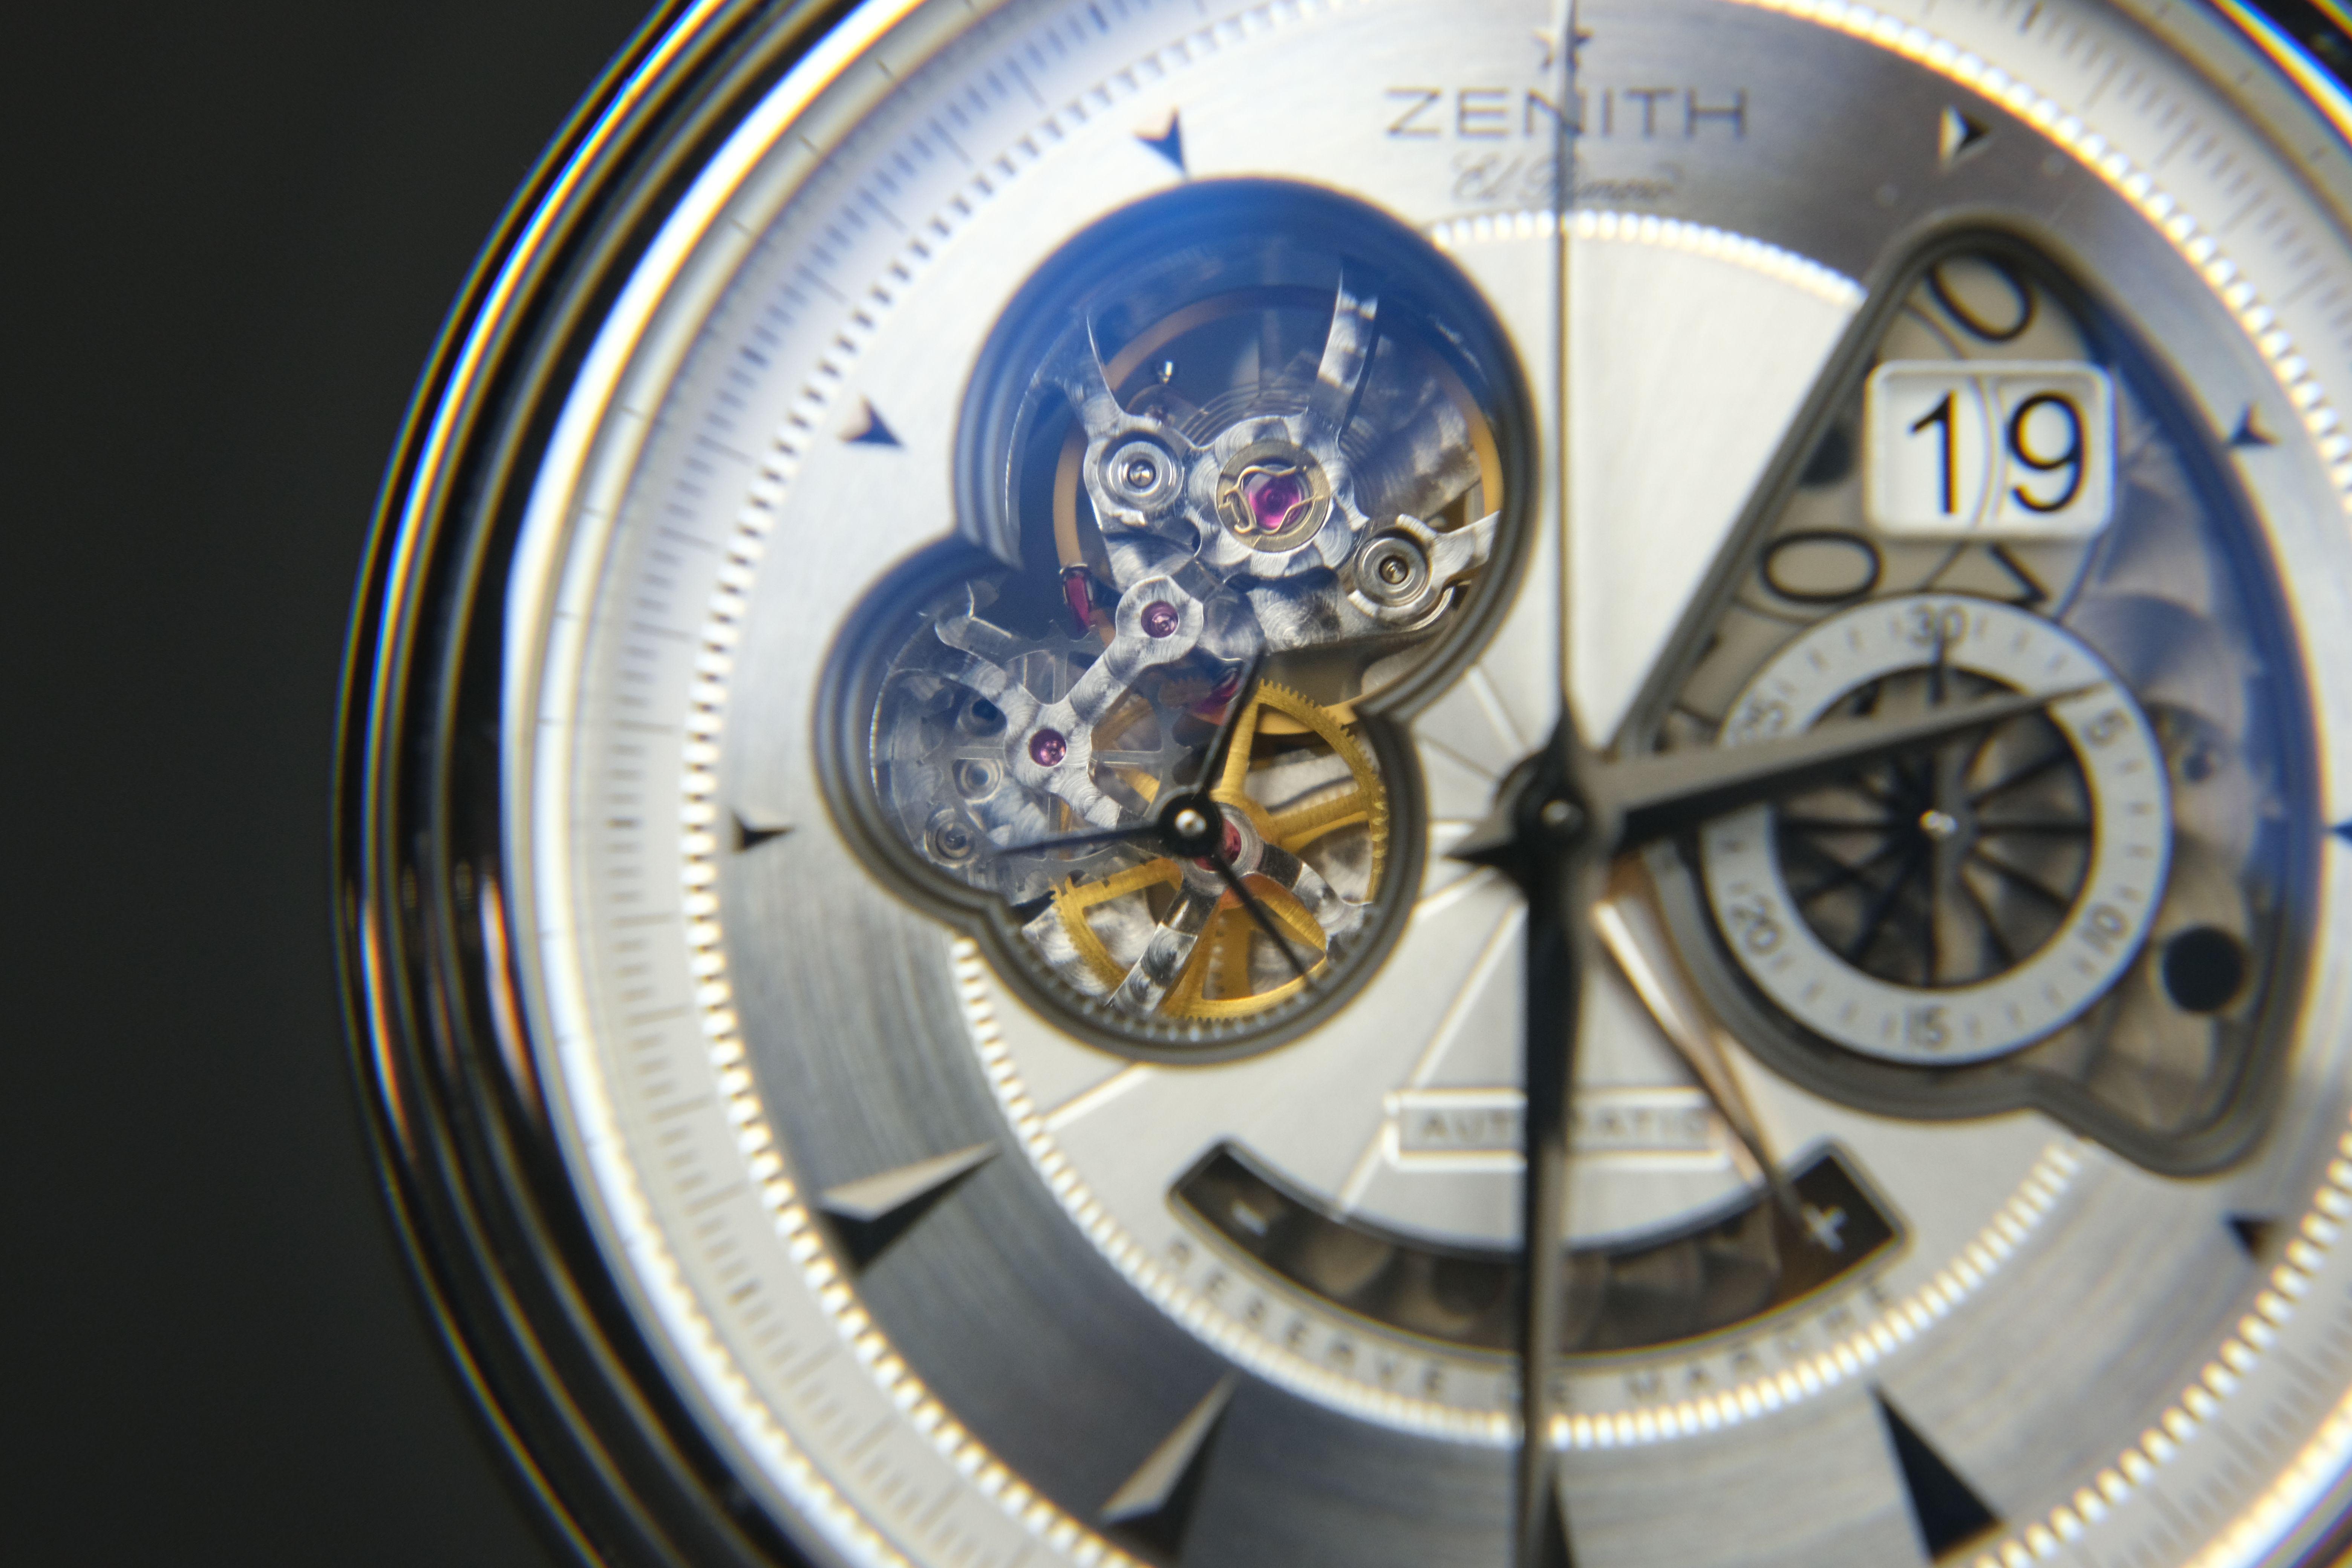 ITEM DETAILS

Brand: Zenith
Model Name: Chronomaster XXT Open Grand Date
Model Number: 03.1260.4039/01.C611
Bezel Material: Stainless Steel 
Case Material: Stainless Steel
Movement: Zeith Cal. El Primero 4039, Automatic Column-Wheel Chronograph, 41